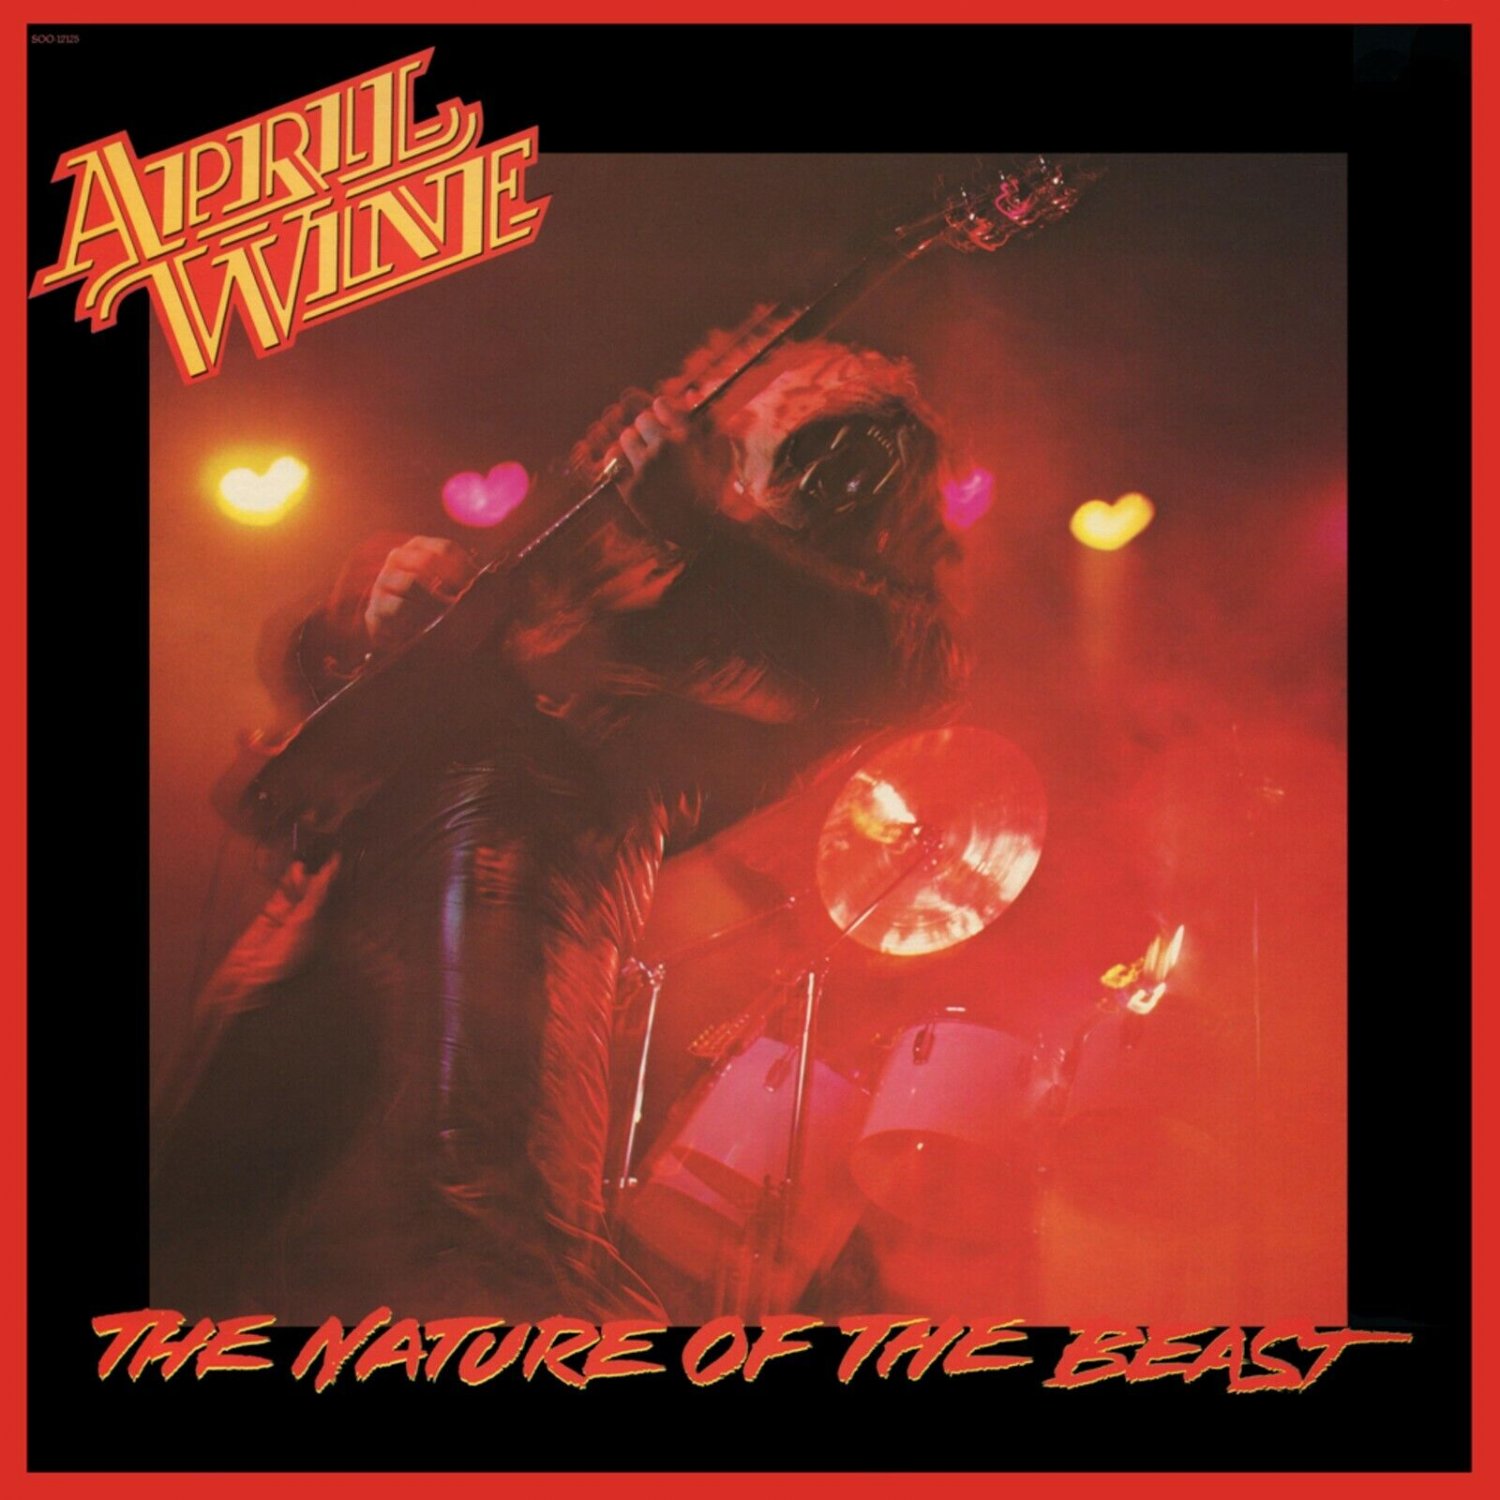 APRIL WINE The Nature of the Beast BANNER 2x2 Ft Fabric Poster Flag album art